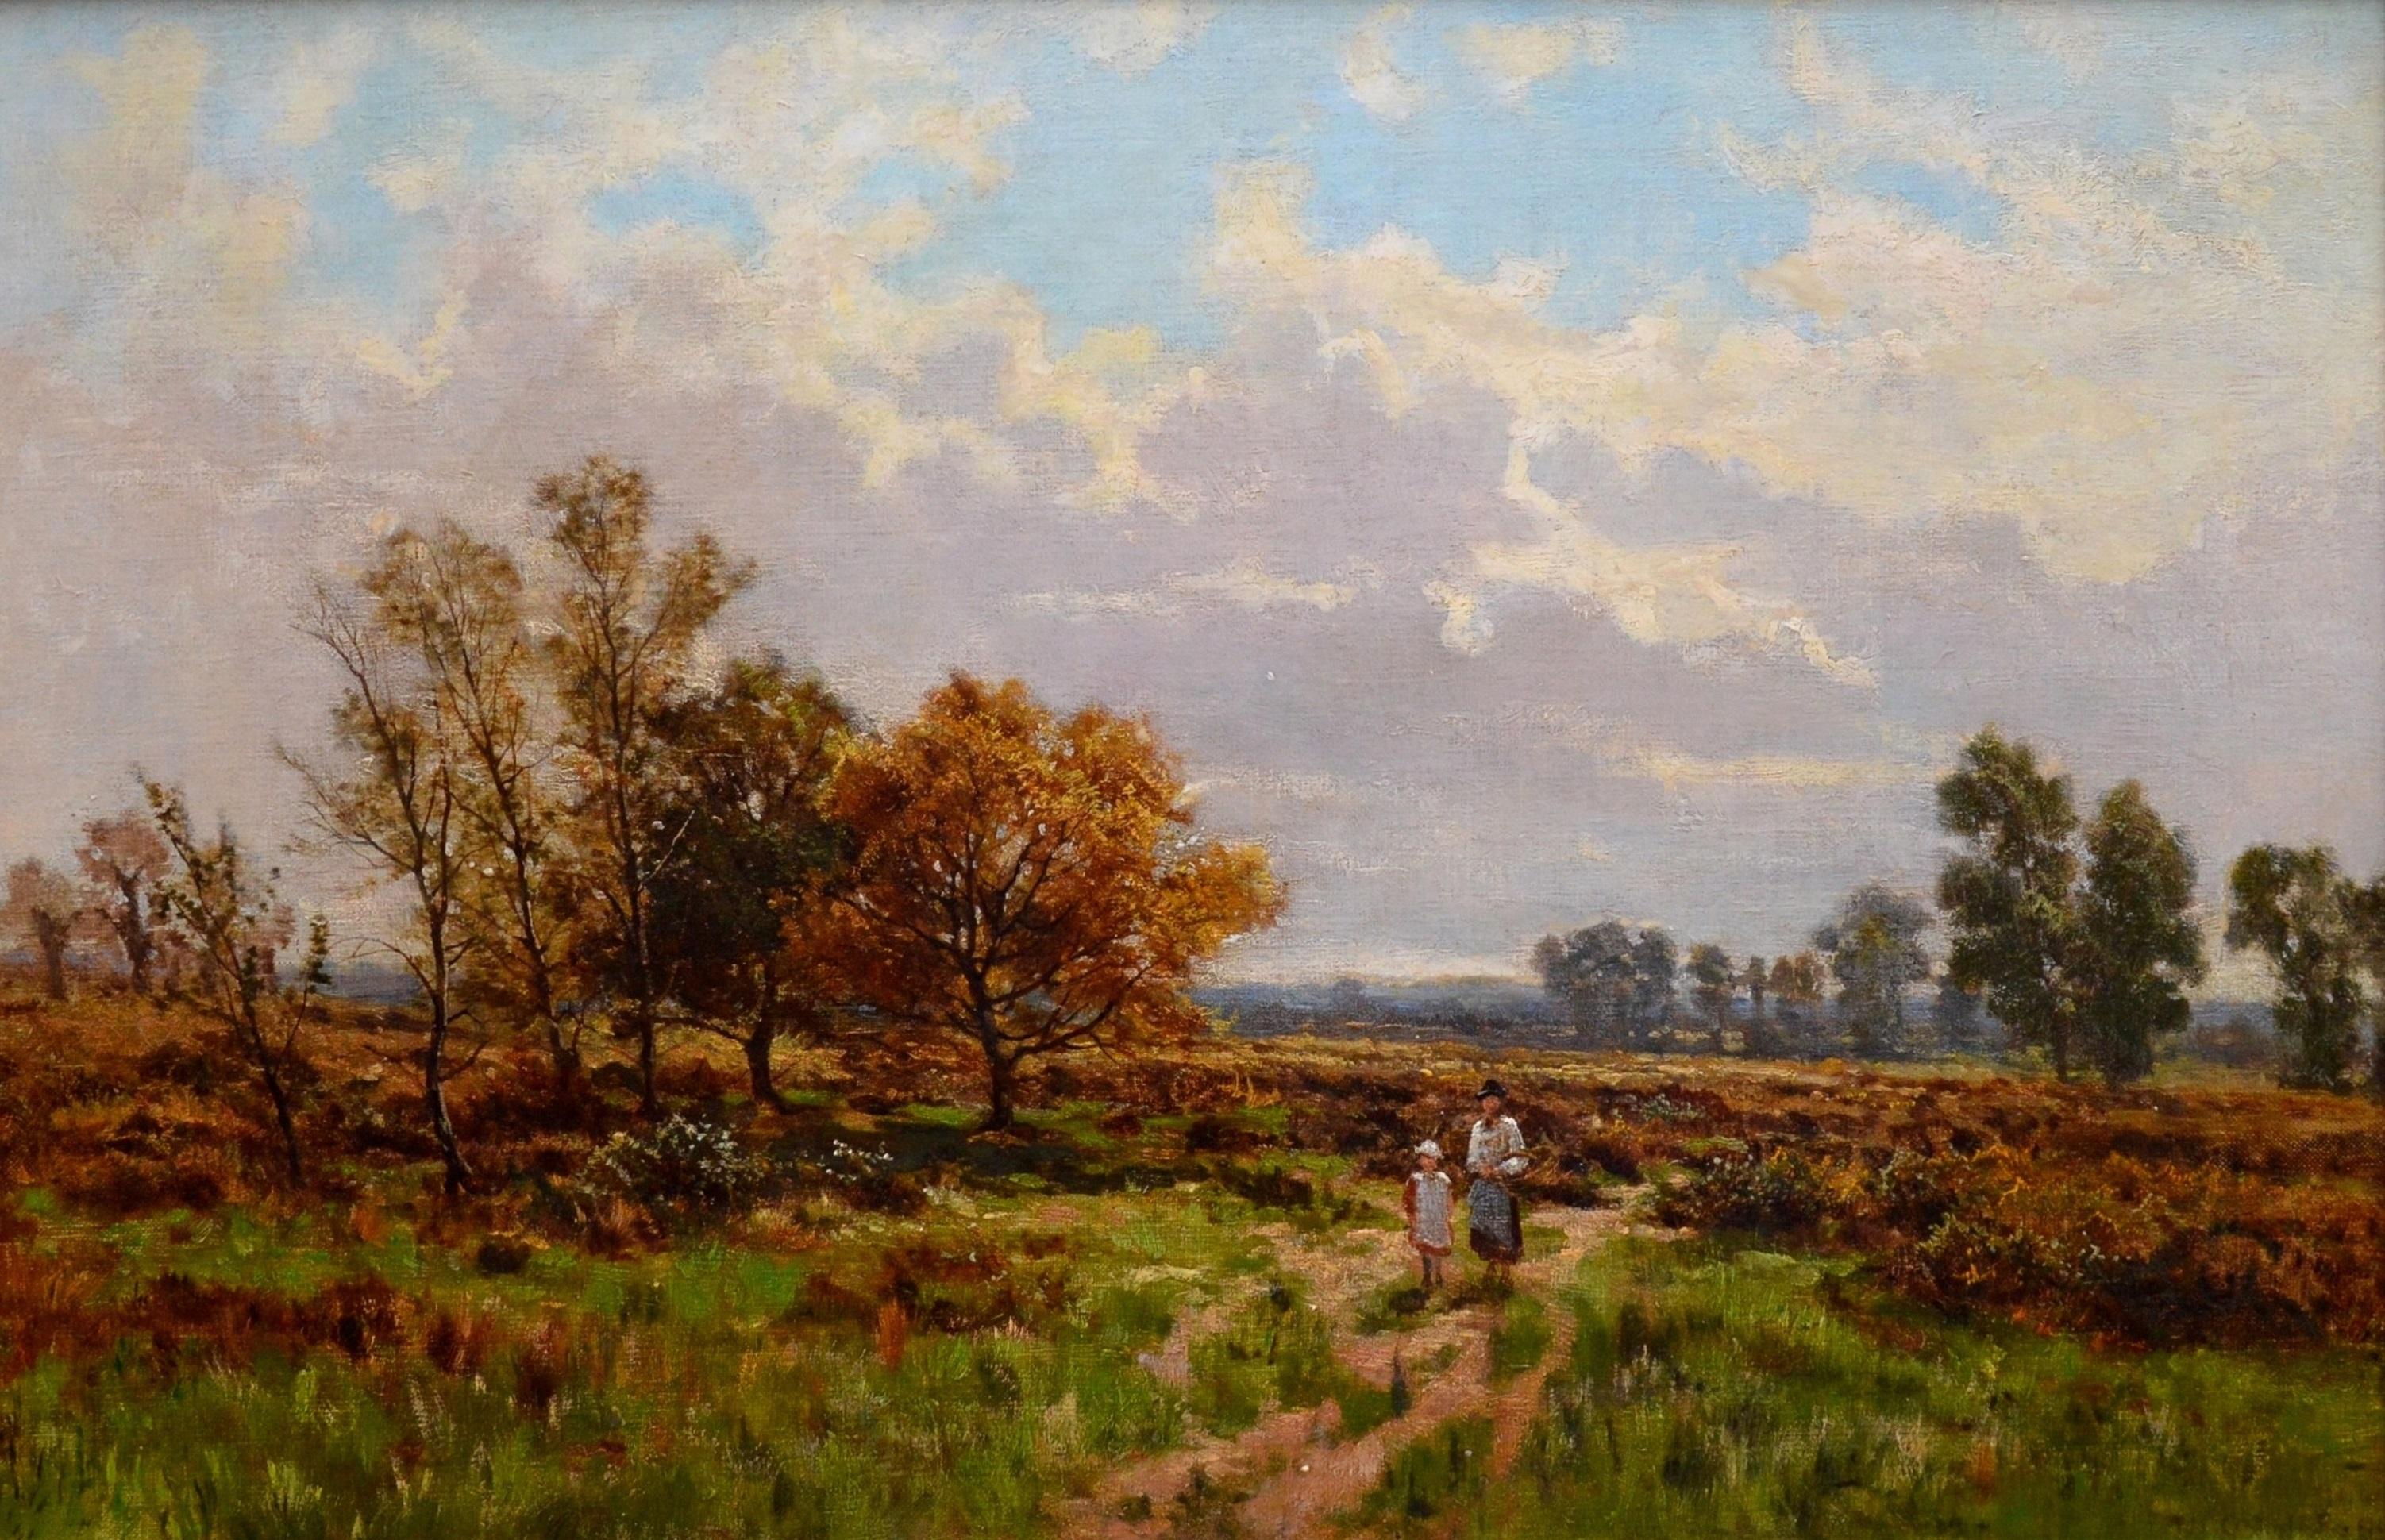 This is a fine 19th century oil on canvas depicting a mother and daughter crossing a field in summertime ‘Near Stratford Upon Avon’ by the listed Victorian landscape painter Arthur Bevan Collier 1832-1909. The painting is signed by the artist and